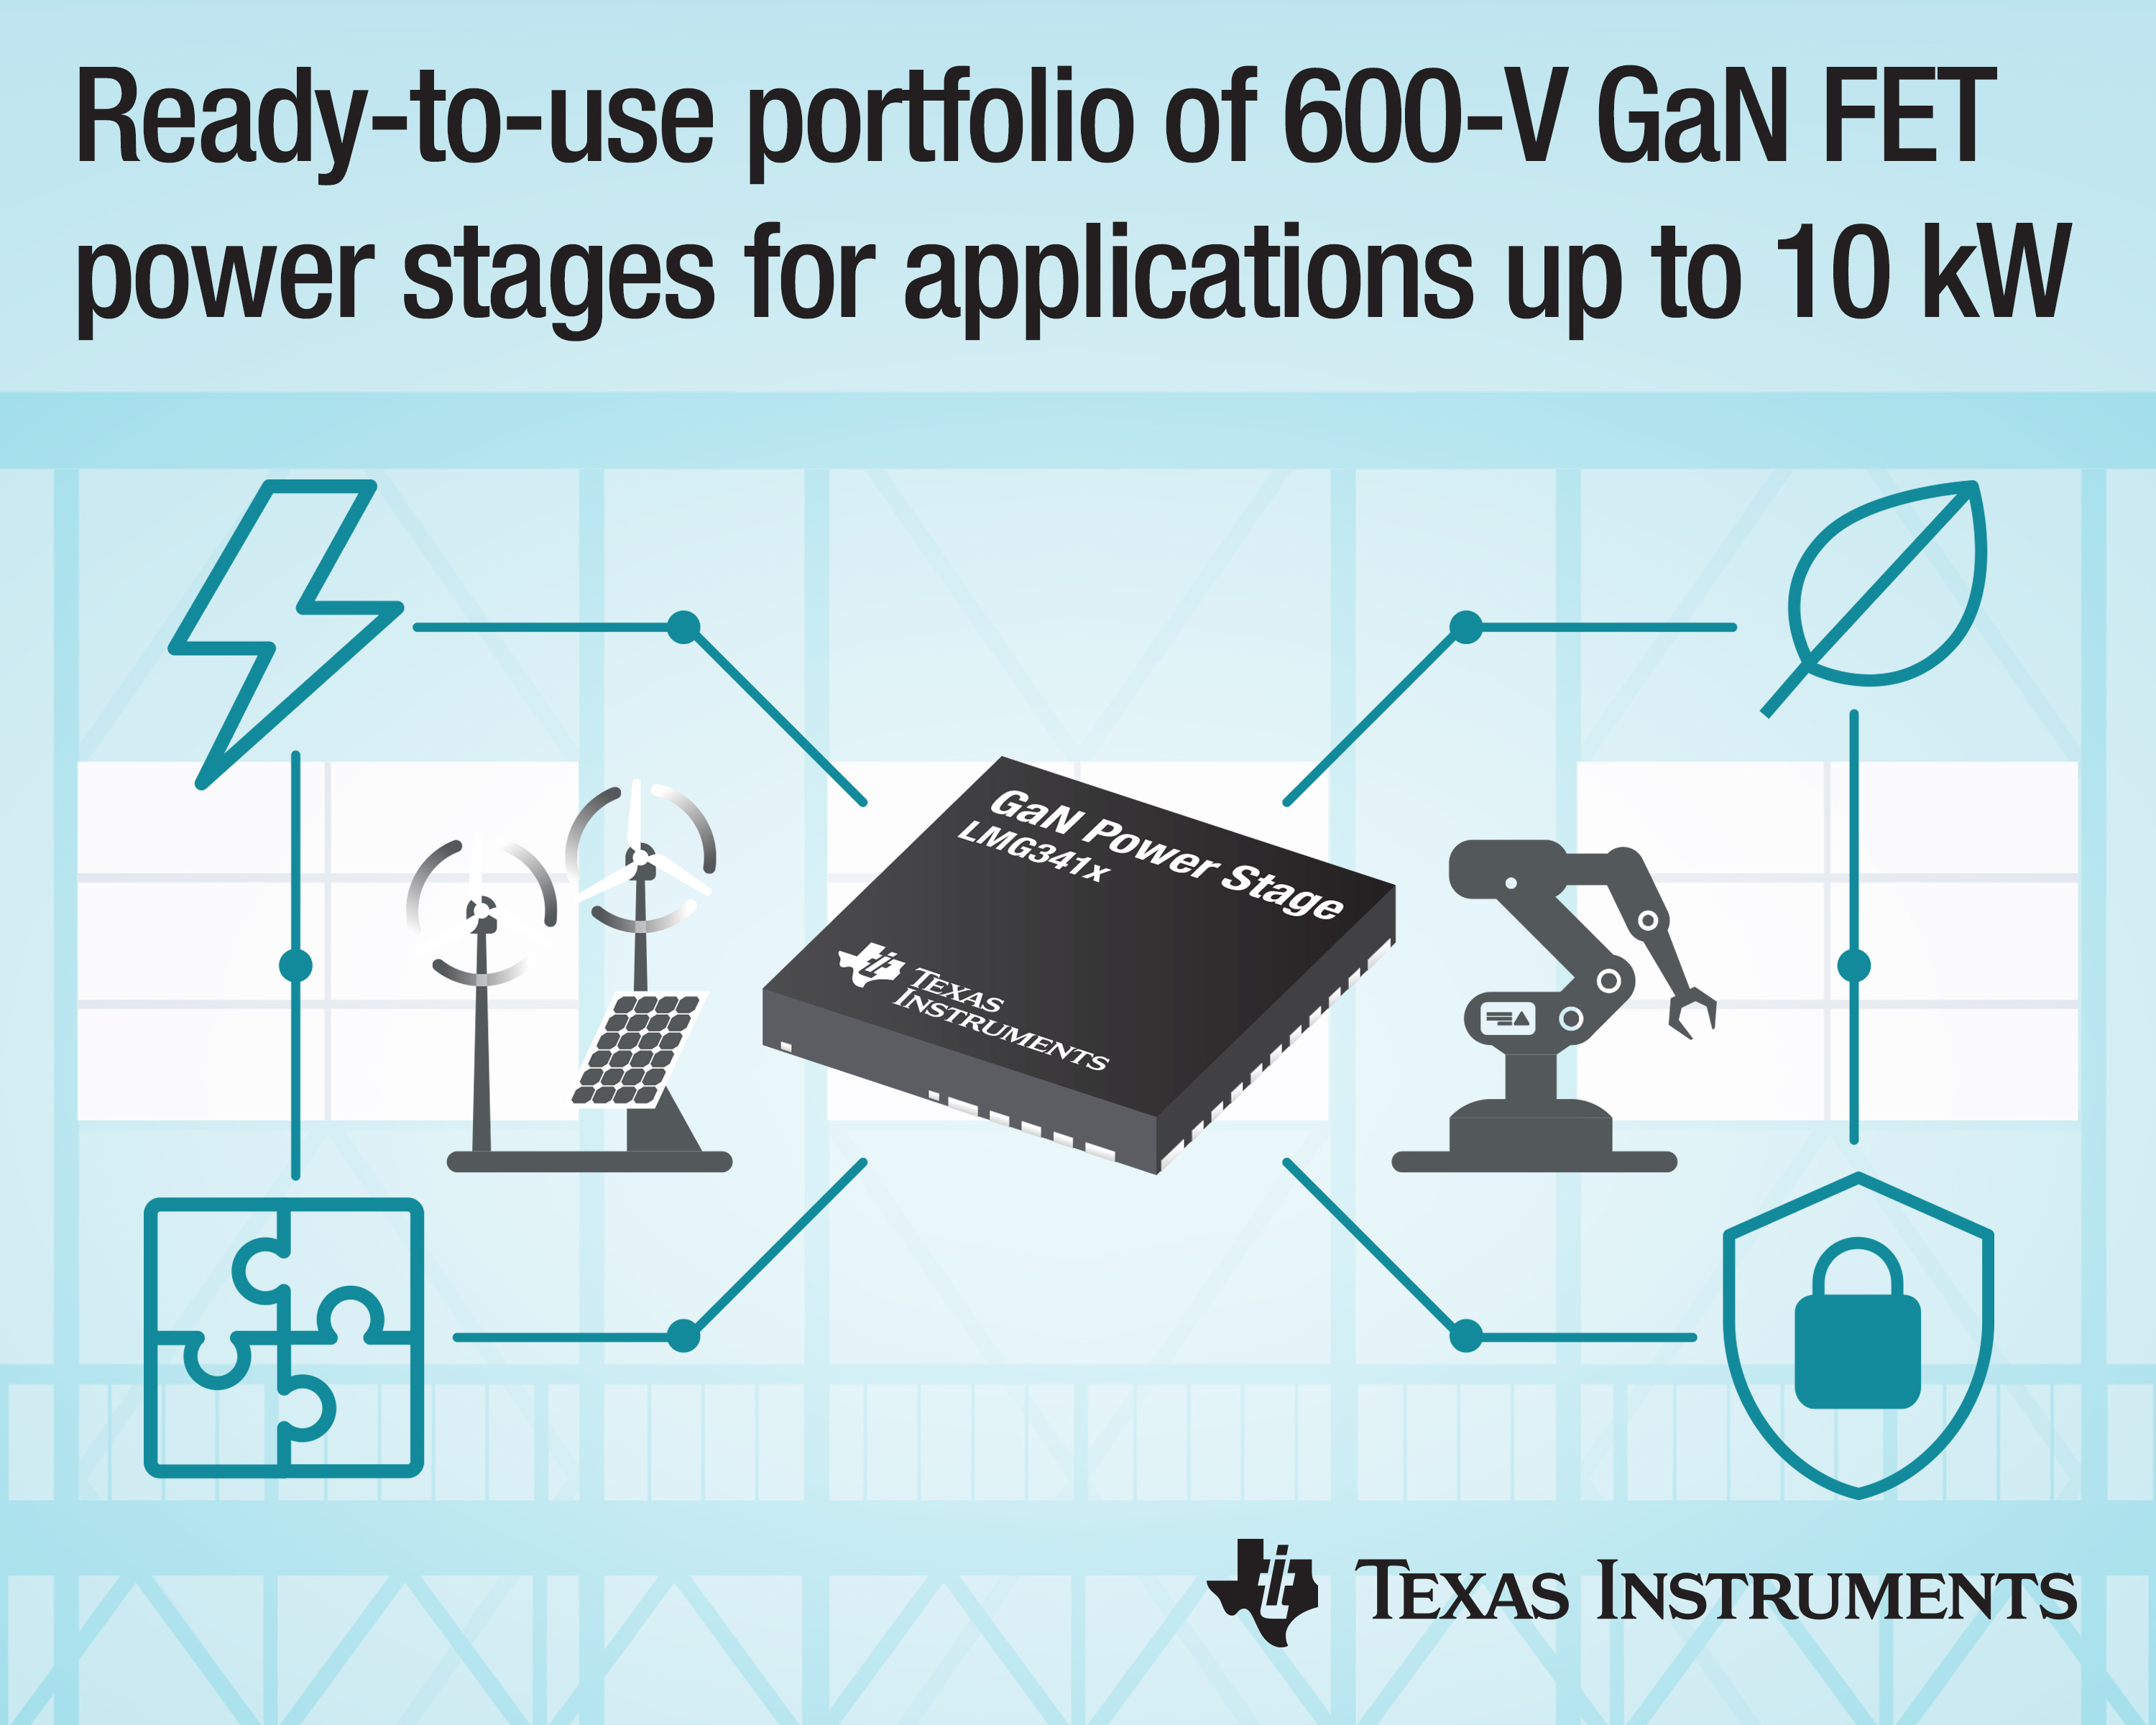 600-V GaN FET Supports Applications up to 10 kW